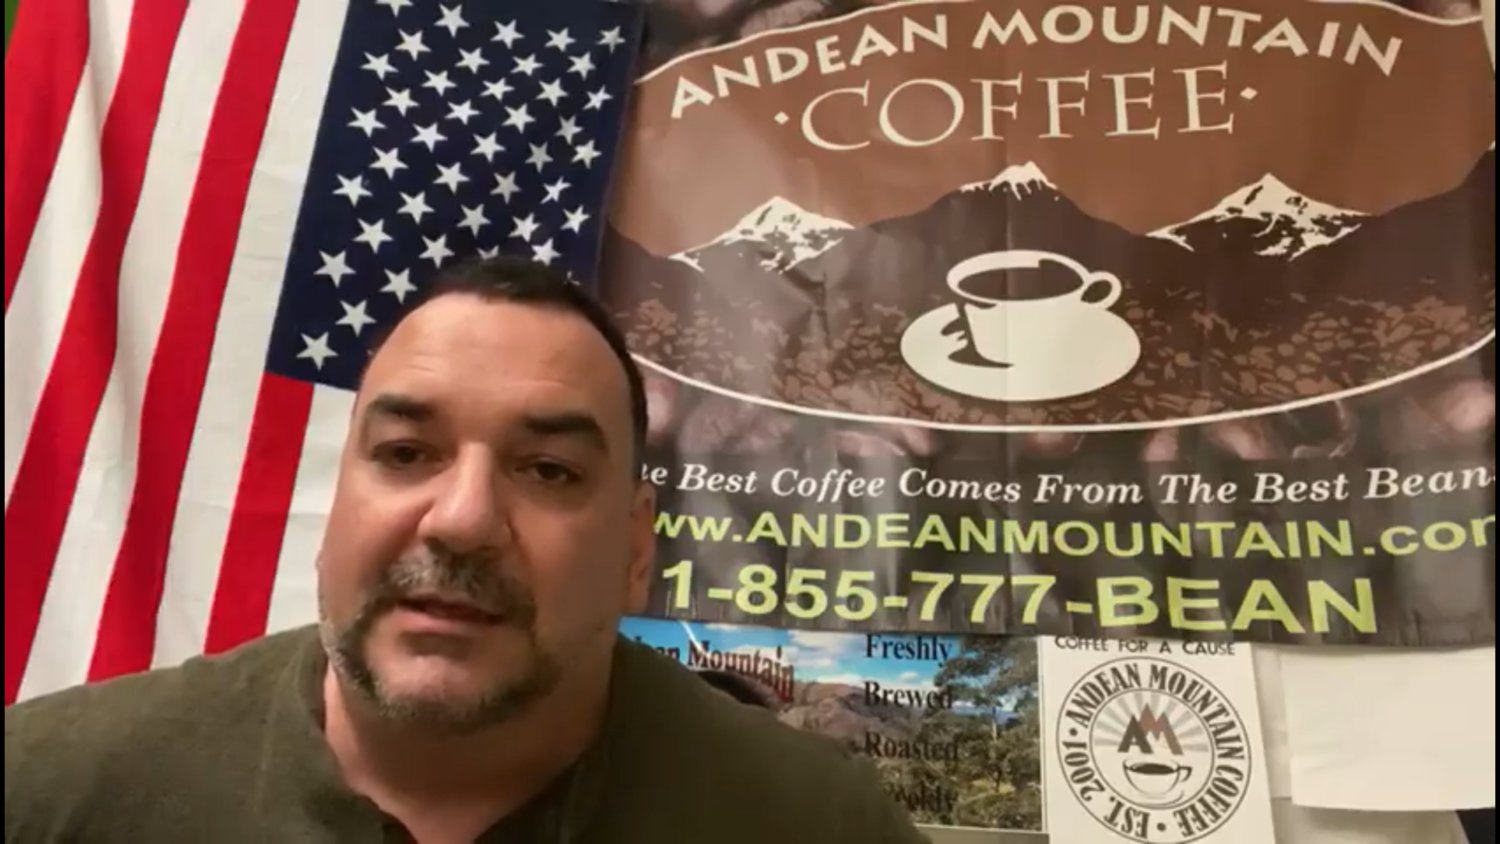 George Franzese, of Oceanside, gave an update on his company’s partnership with Island Harvest. For every pound of coffee beans sold, Andean Mountain is donating $1 to either Tunnels to Towers or Island Harvest.